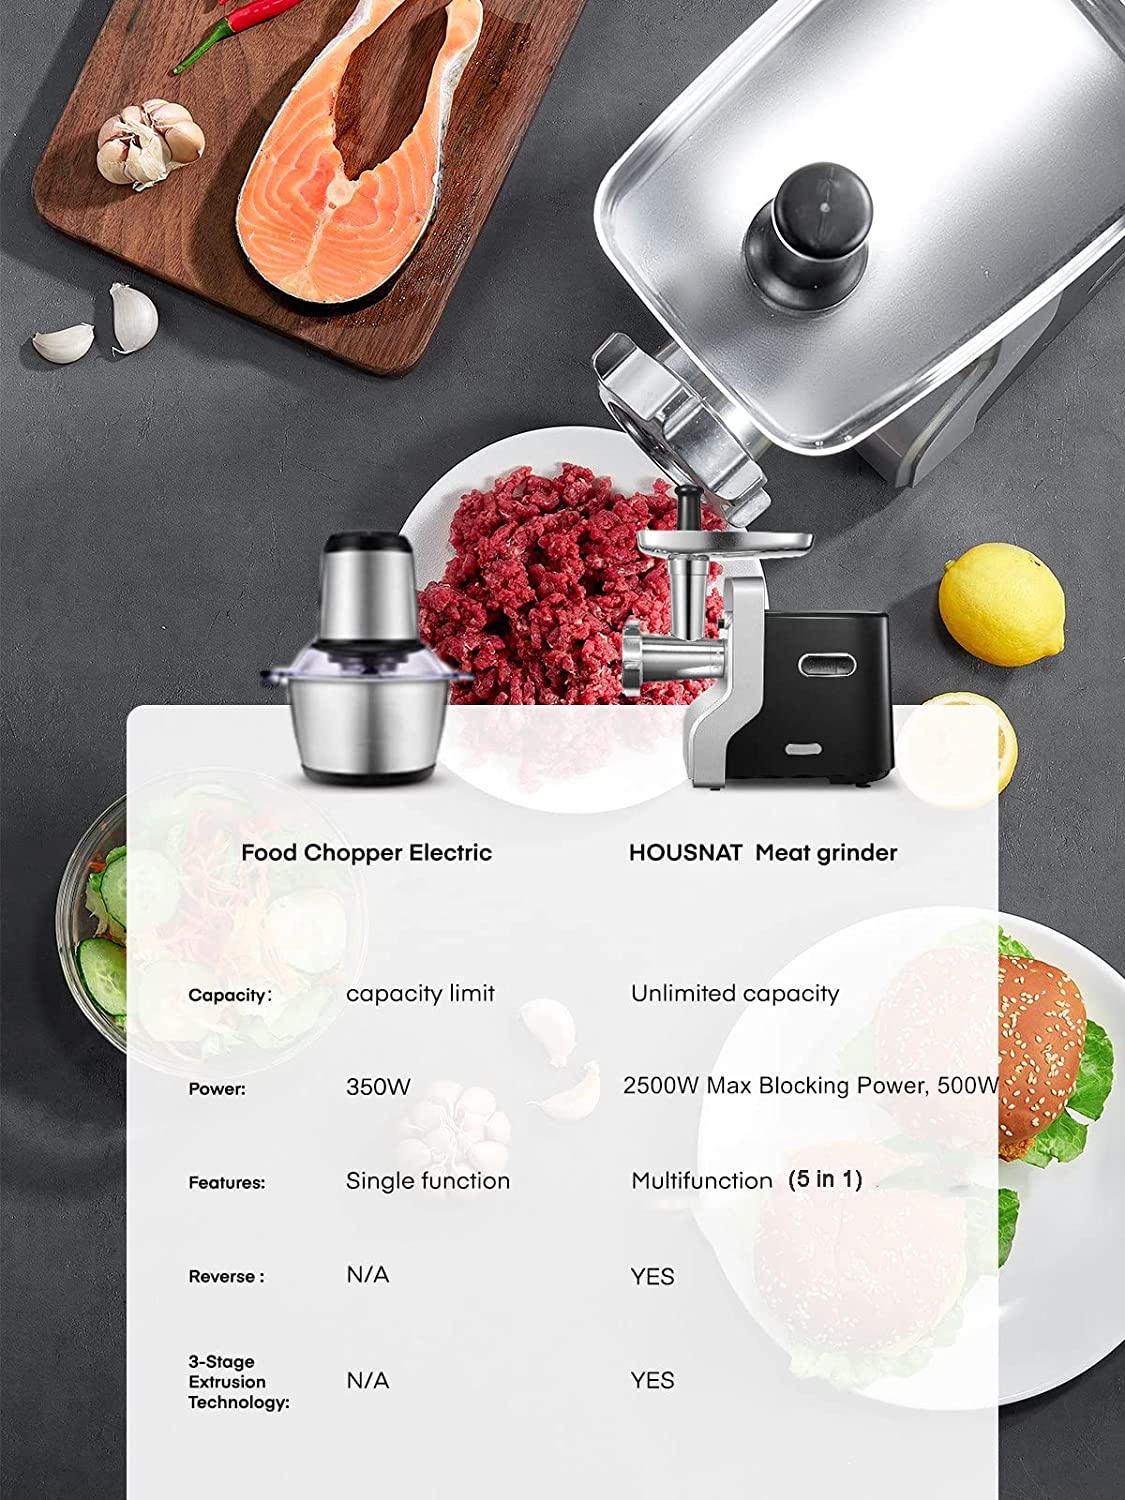 high quality meat grinder, Heavy Duty Electric Meat Grinder, 2500W Max Ultra Powerful, 5 in 1 HOUSNAT Multifunction Food Grinder, Sausage Stuffer, Slicer/Shredder/Grater, Kubbe & Tomato Juicing Kits, Home Kitchen Use